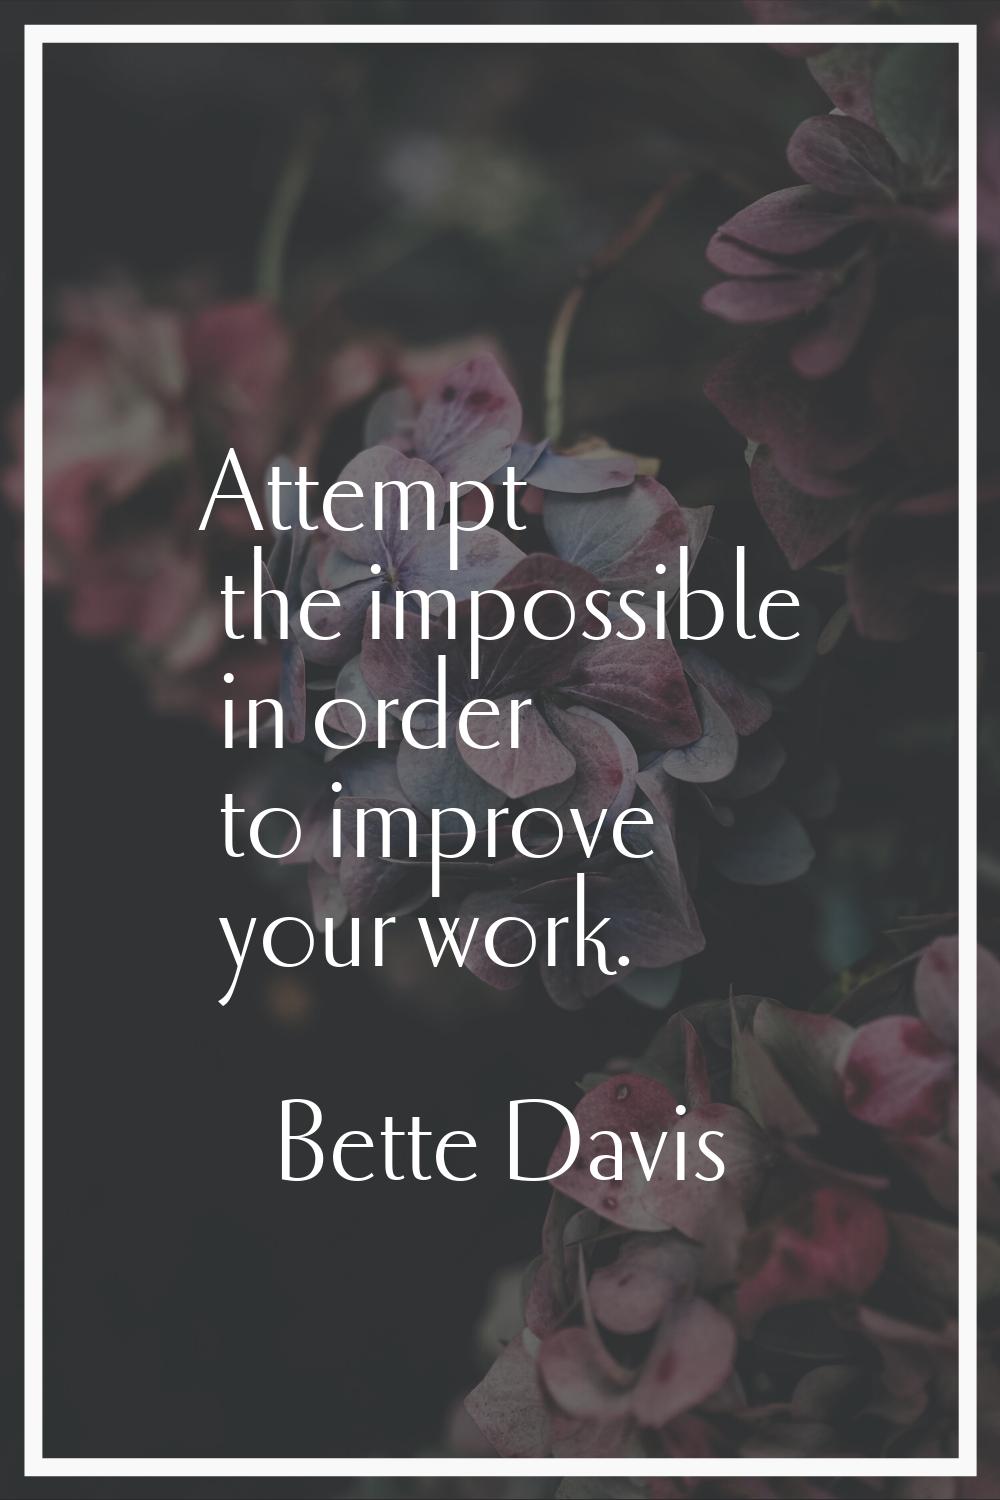 Attempt the impossible in order to improve your work.